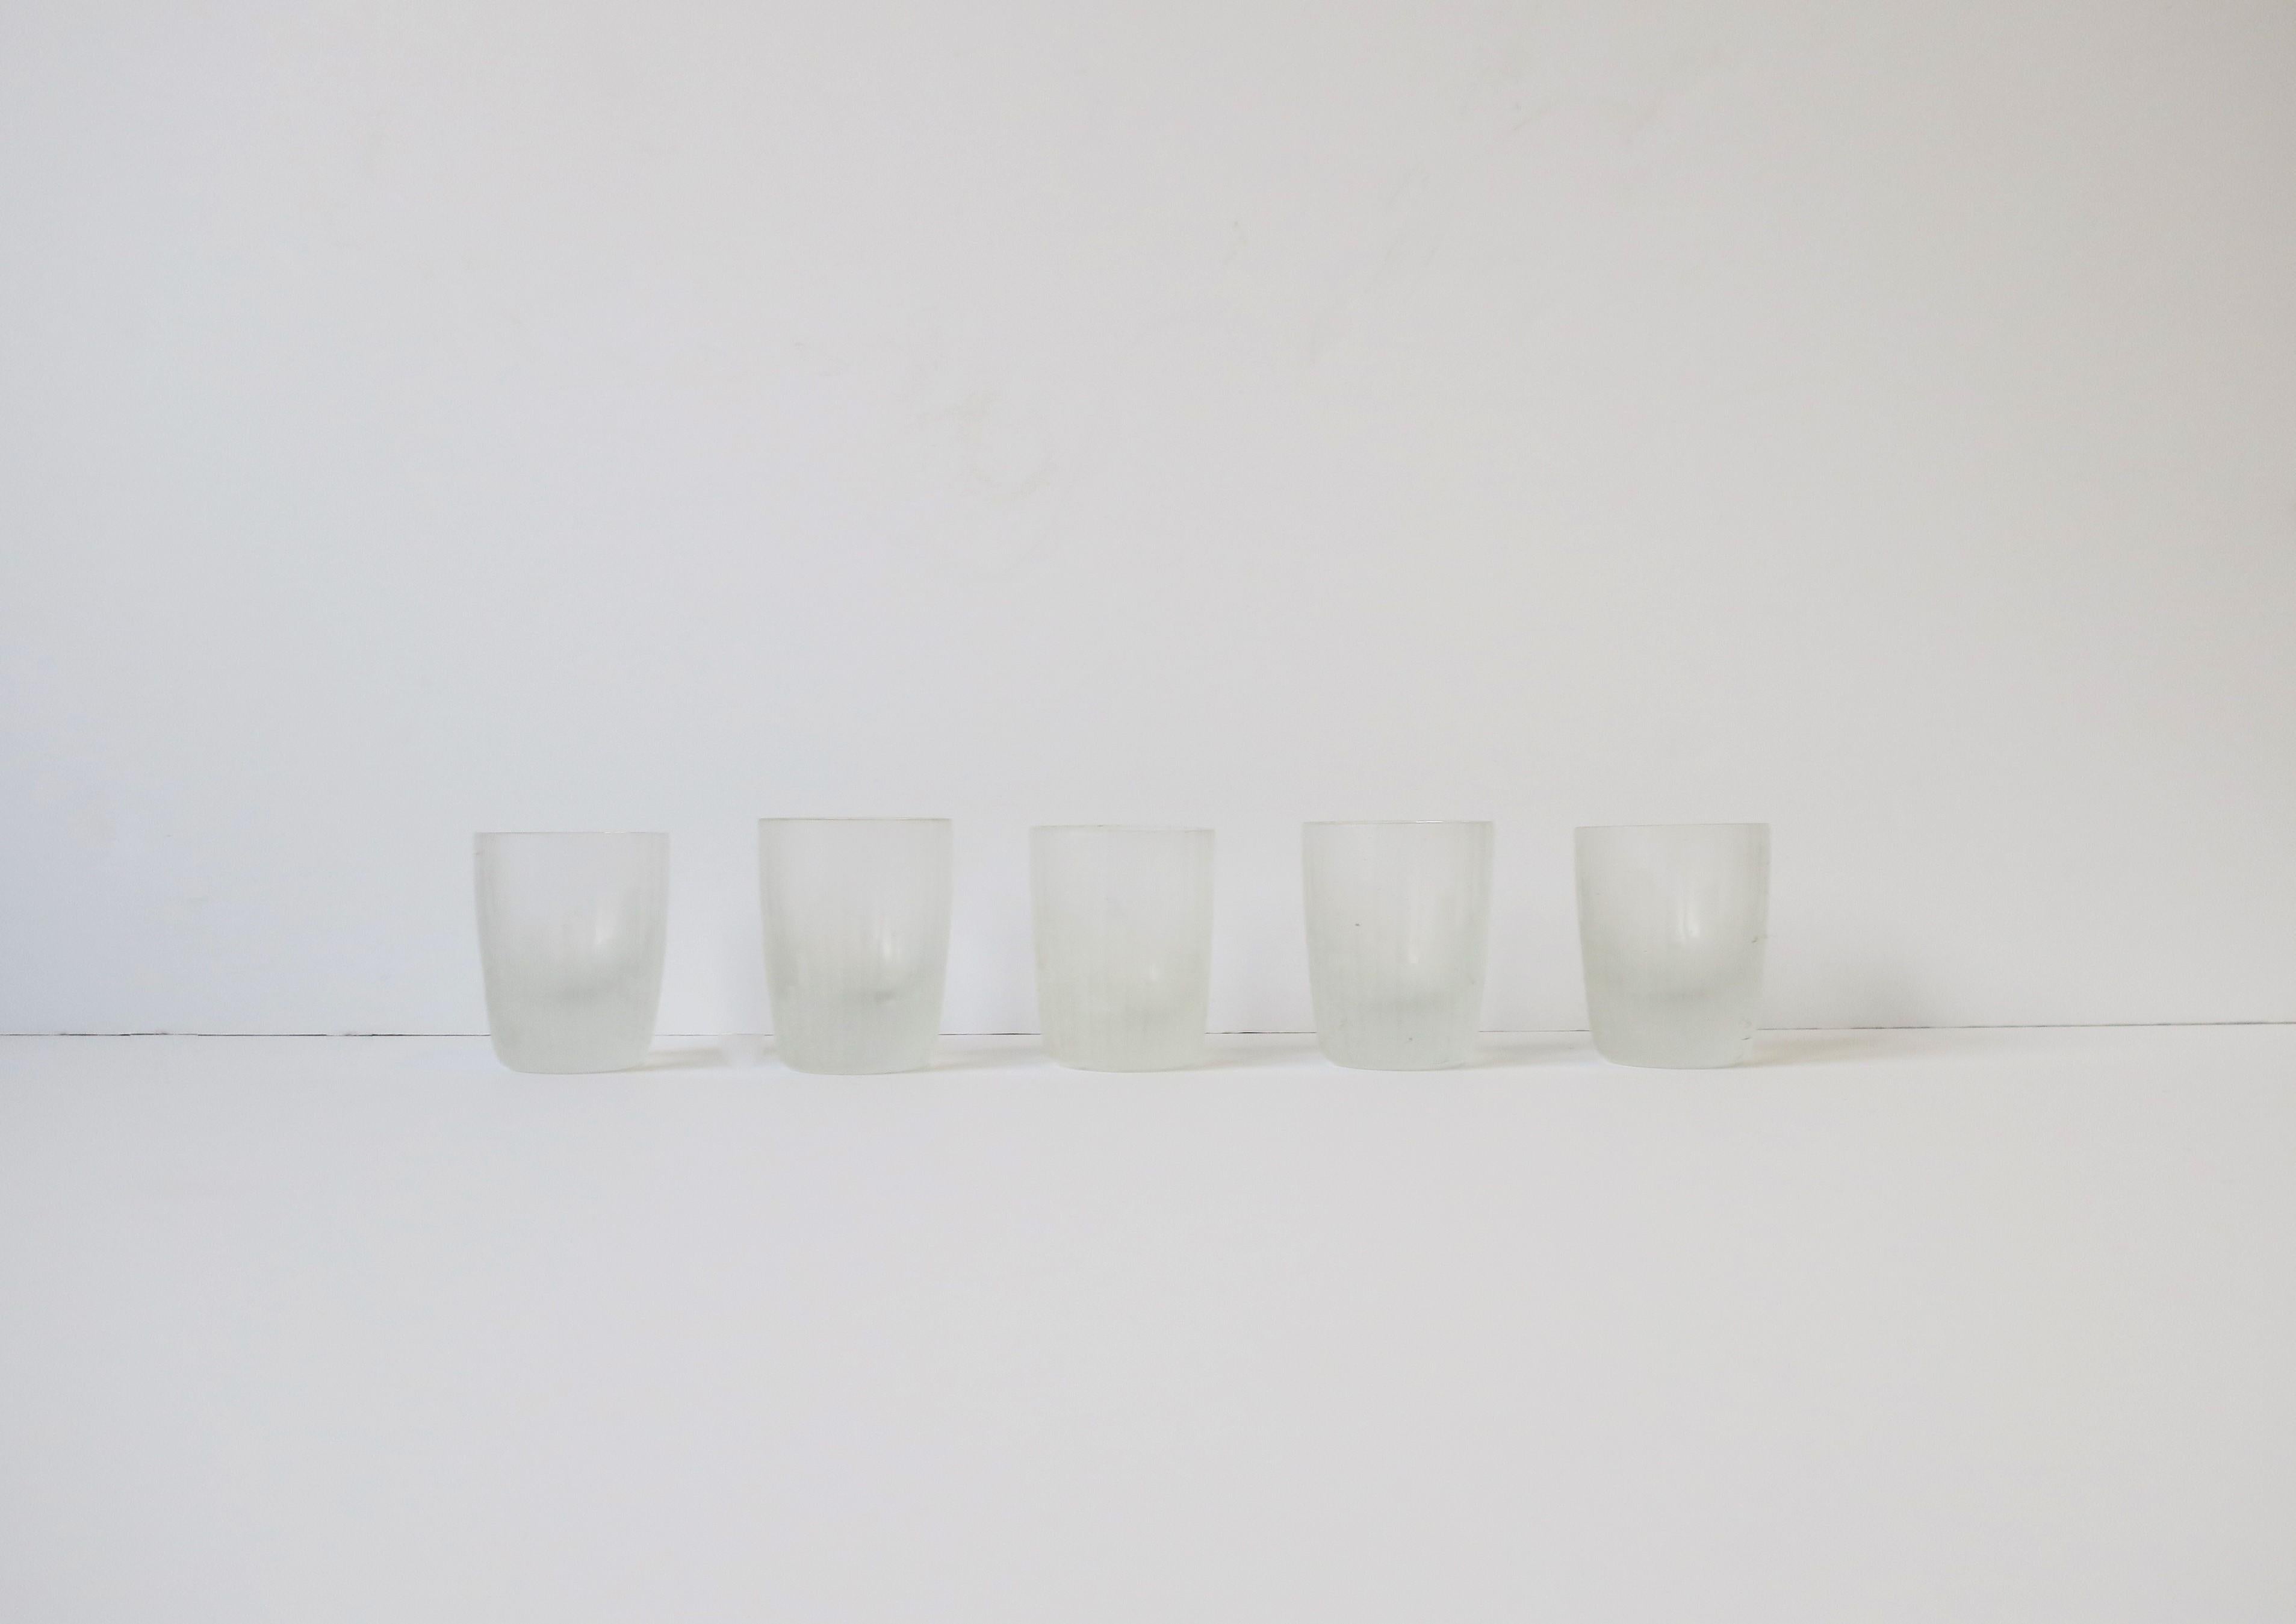 A very beautiful and rare set of five (5) '70s Modern aperitif or shot glasses by Carl Rotter Lubeck, circa 1970s, late-20th century, West Germany. Glasses have a Modern/Art Deco cityscape design on a matte white glass with fluted design. A great